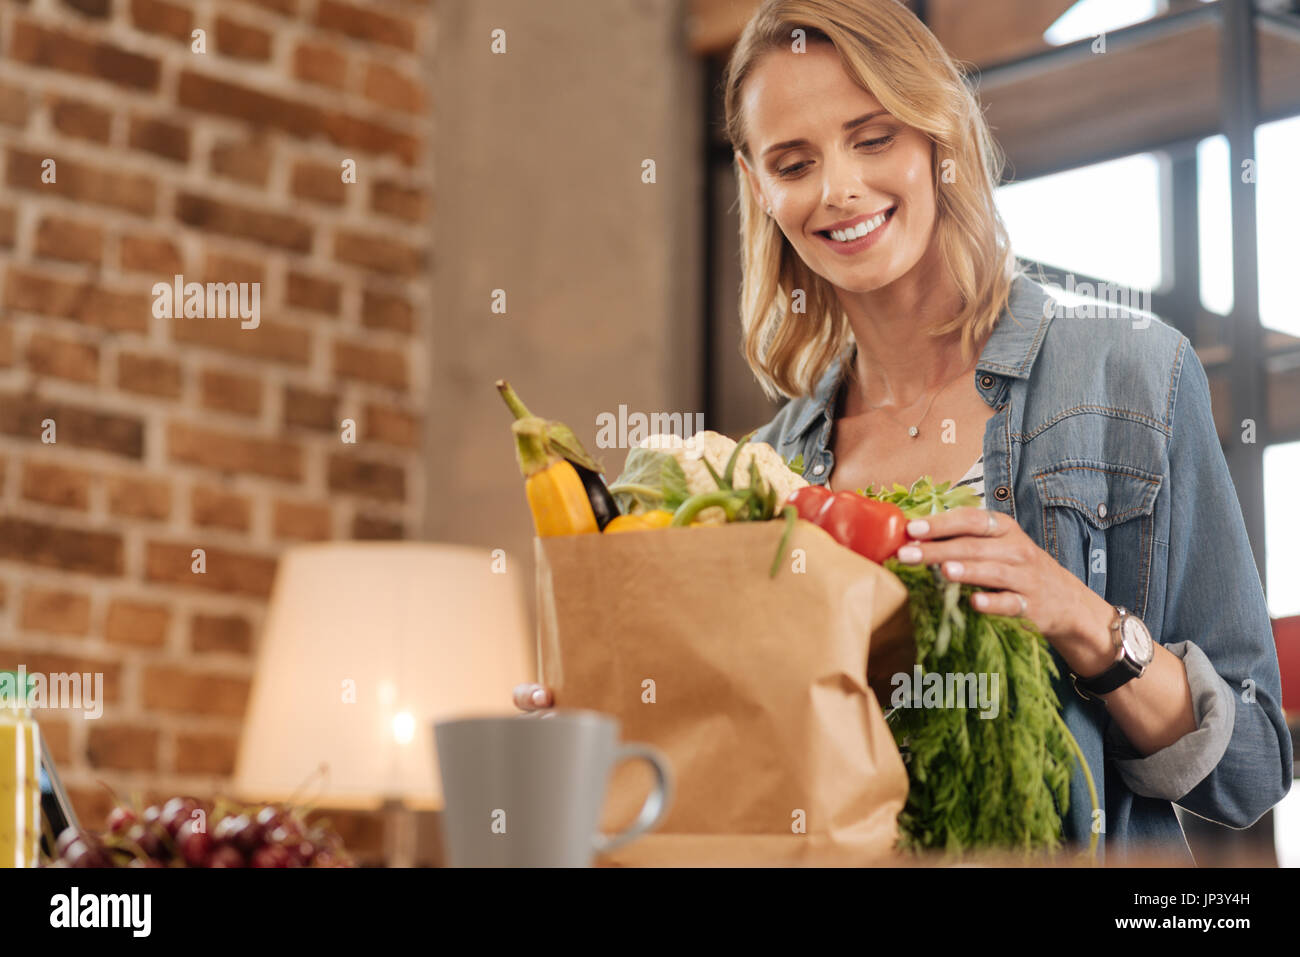 Admirable happy lady unpacking the paper bag Stock Photo